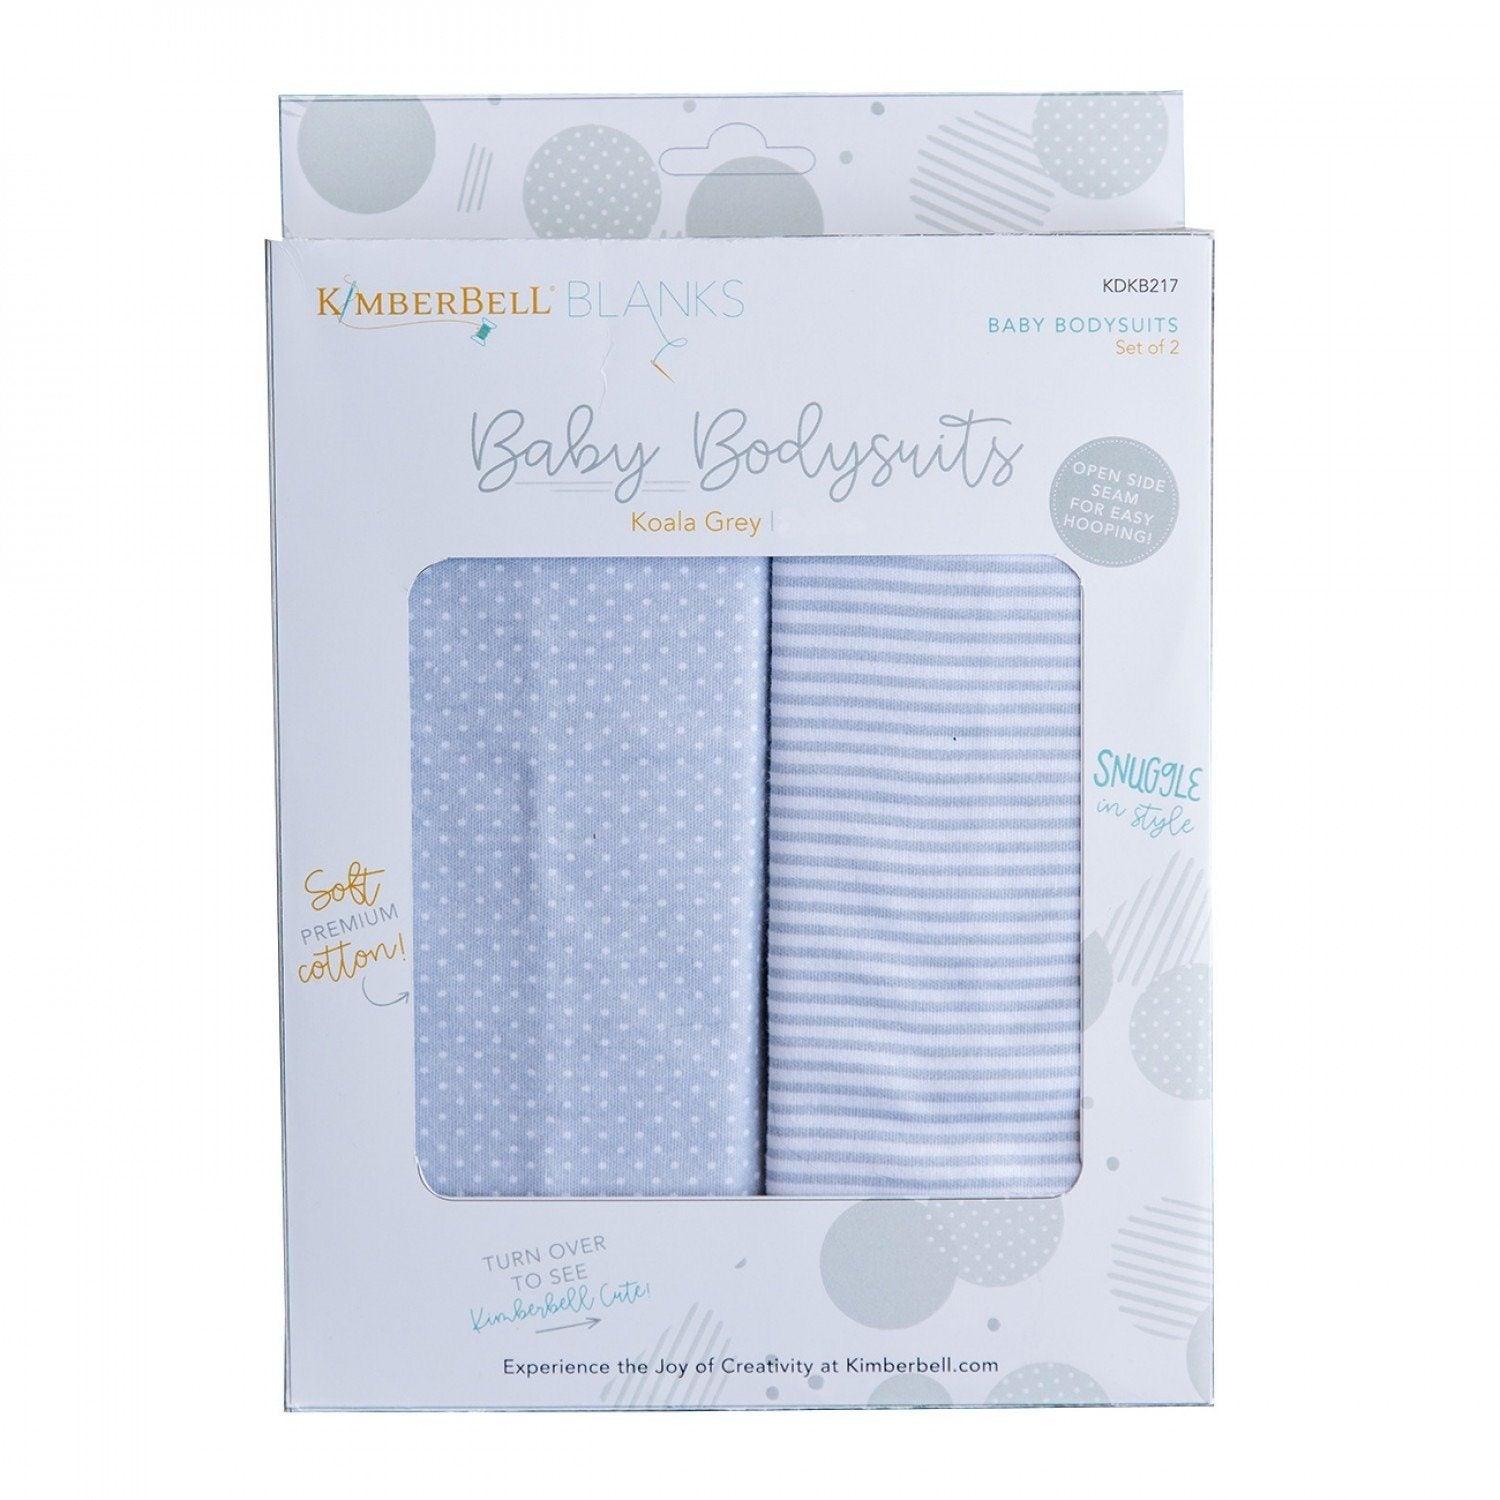 Baby Bodysuits - Koala Grey -  (6-9 Months) - Pack of 2 - Kimberbell - Kawartha Quilting and Sewing LTD.